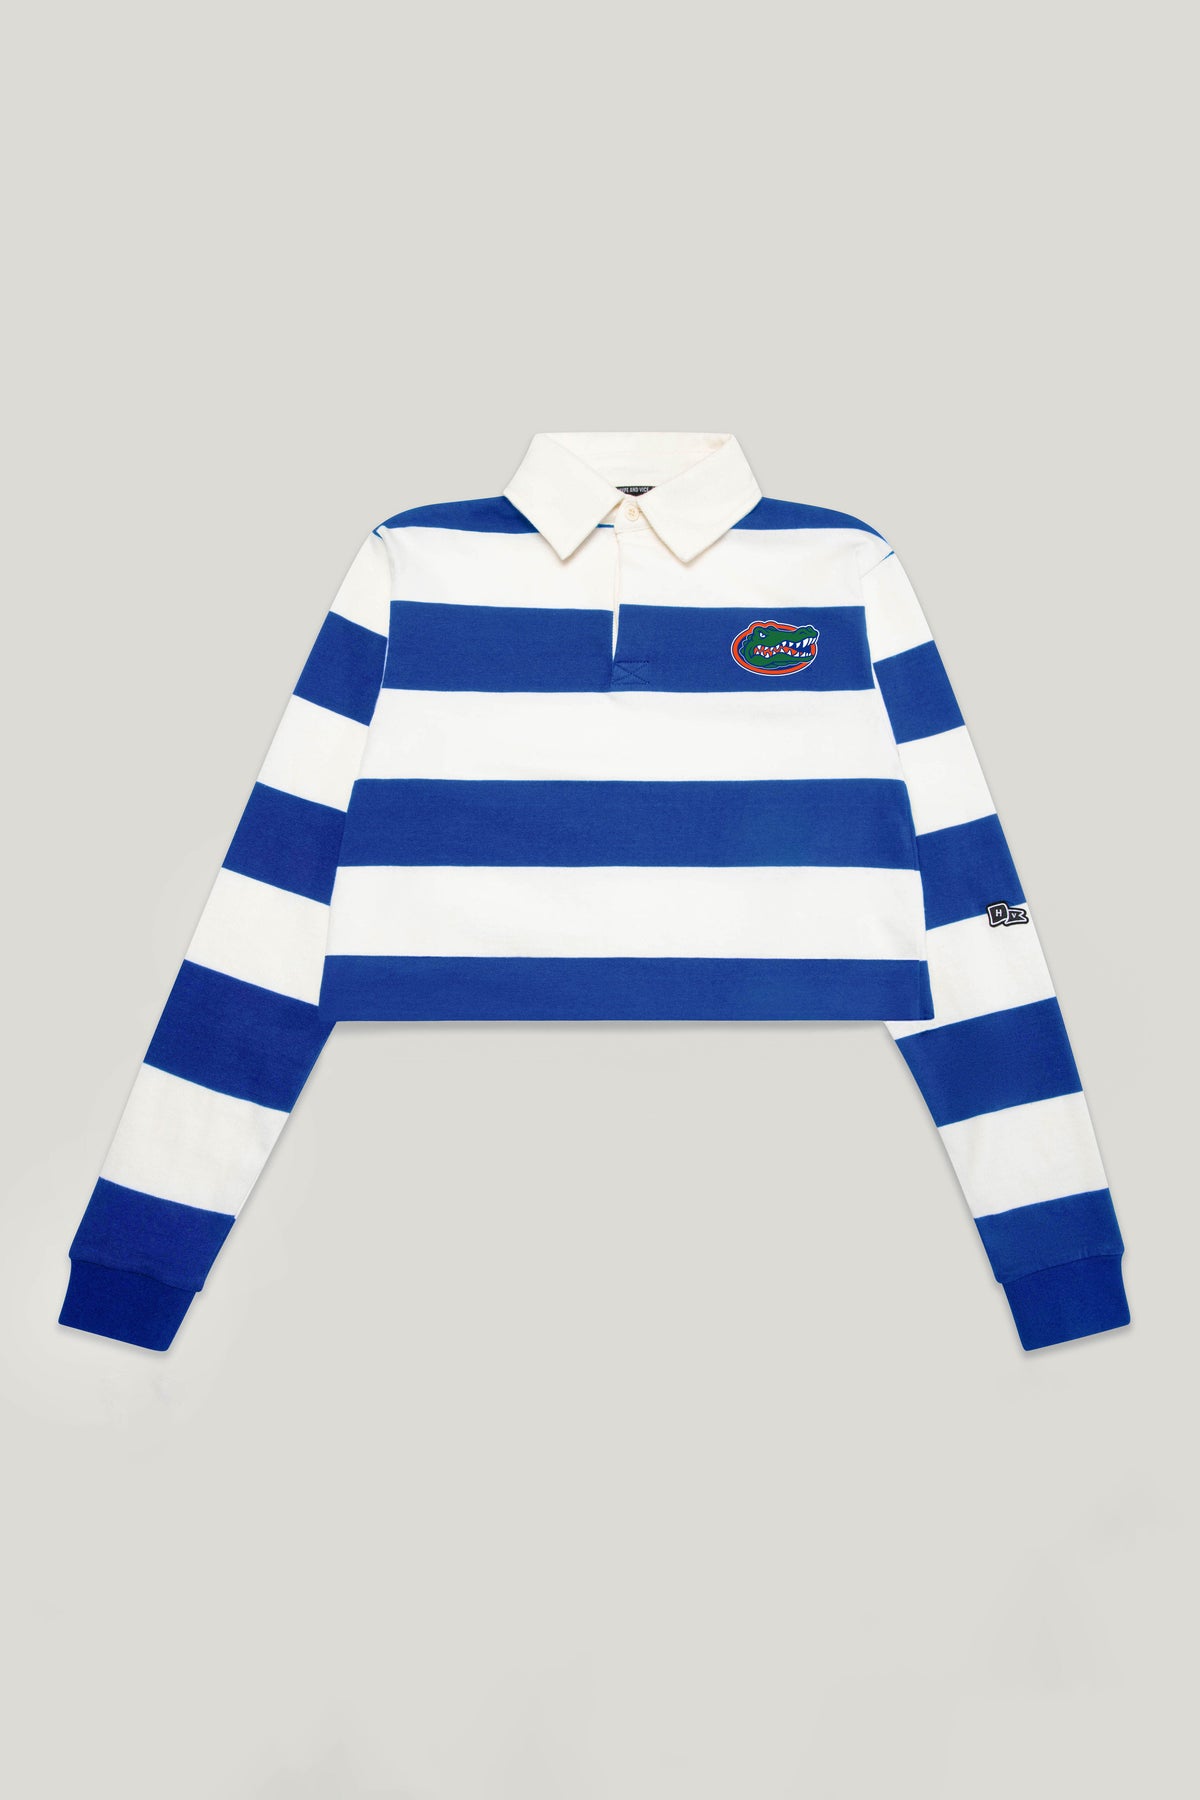 University of Florida Rugby Top